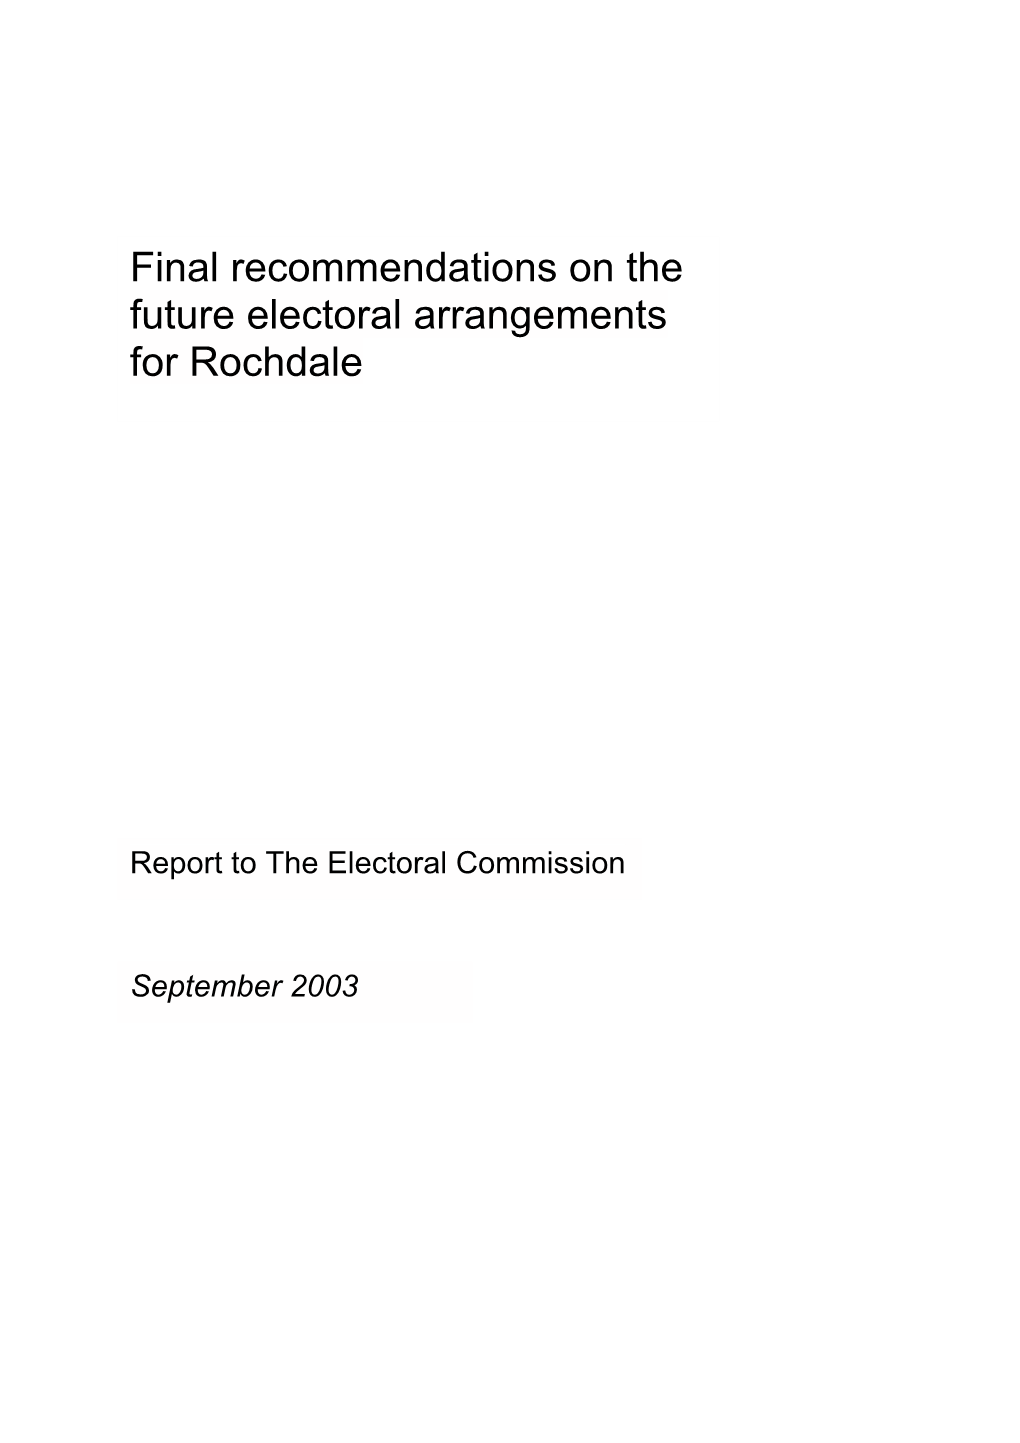 Final Recommendations on the Future Electoral Arrangements for Rochdale